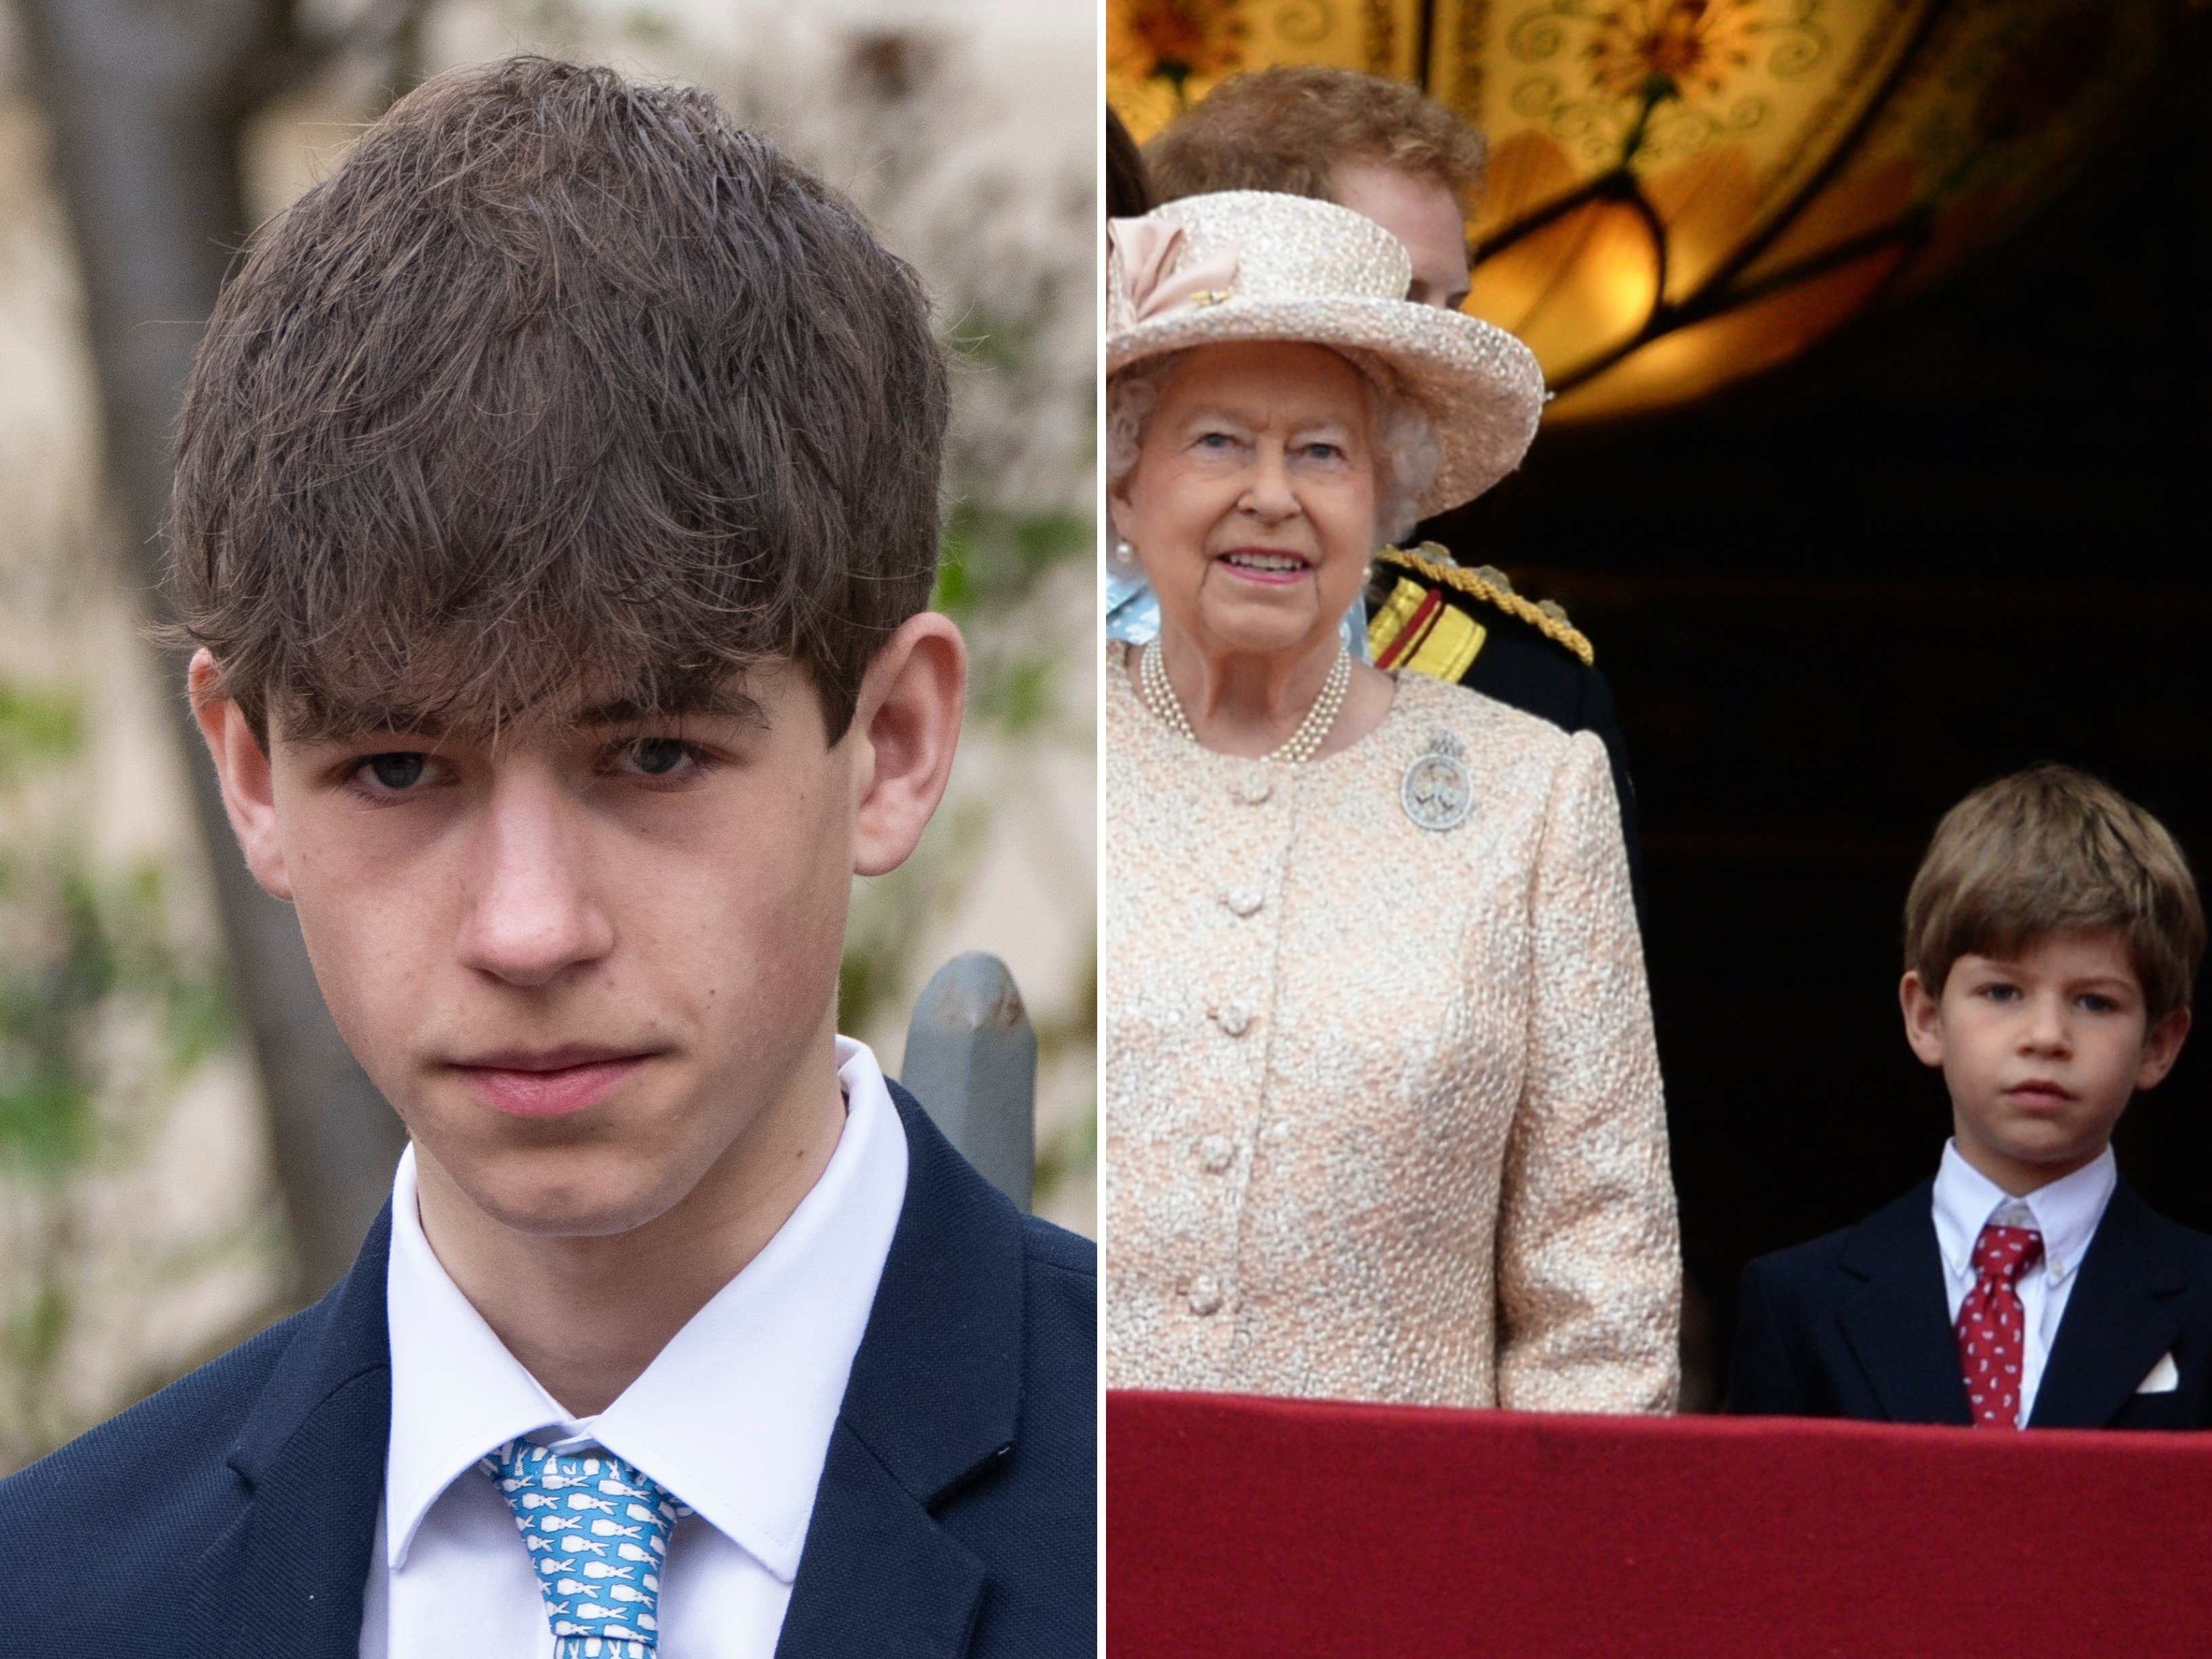 James, Queen Elizabeth’s youngest grandson, was said to be the late royal’s second favourite grandchild. Photo: Getty, WireImage